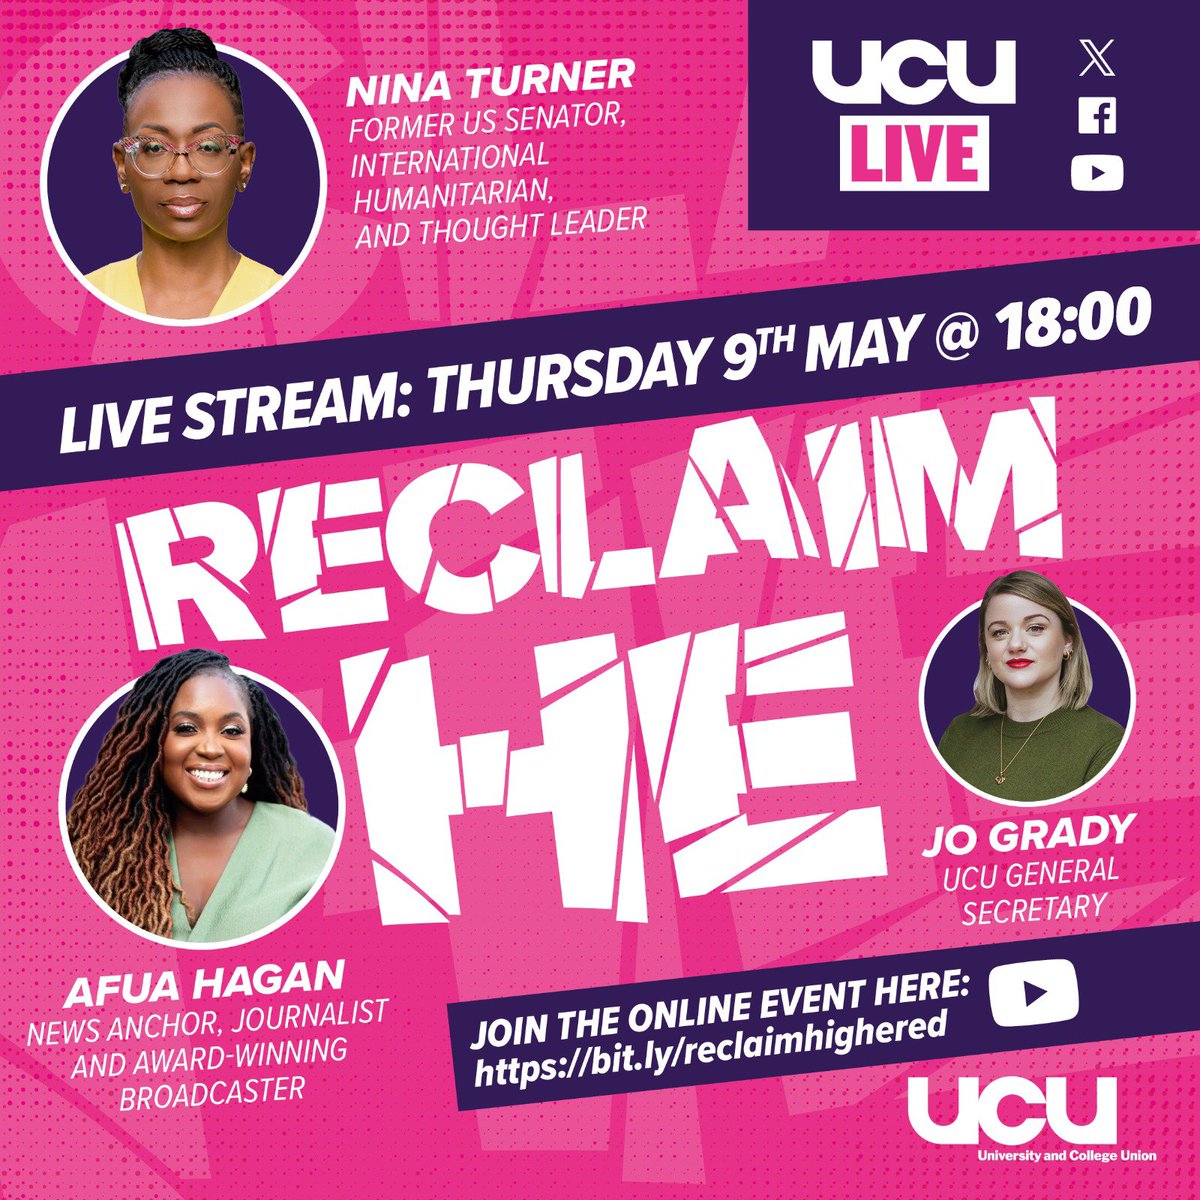 It's time to #ReclaimHigherEd ✊ Join us online tonight at 18:00 to find out more 📢 🔗bit.ly/reclaimhighered